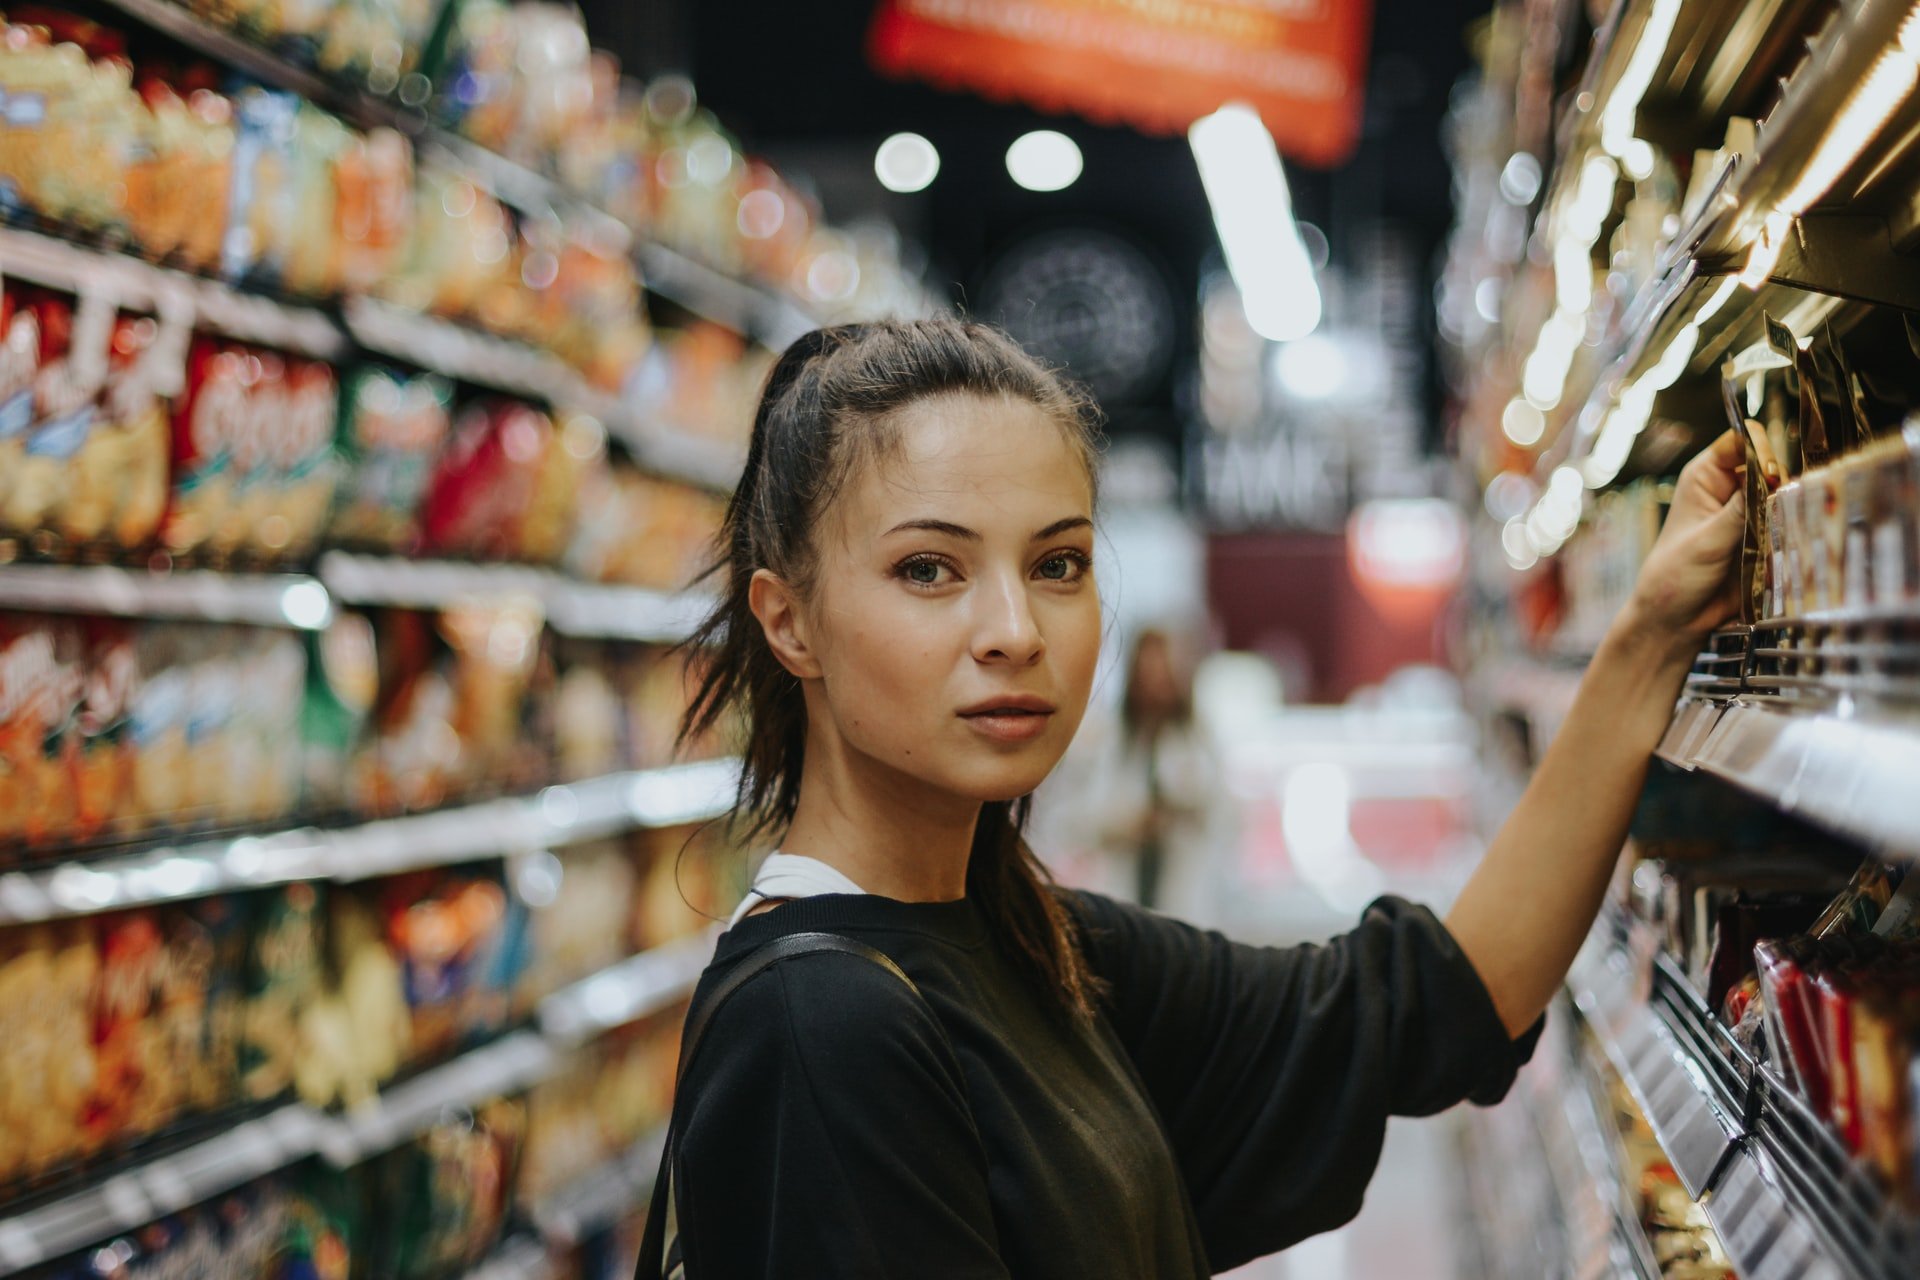 She bought groceries for someone else for the first time | Source: Unsplash